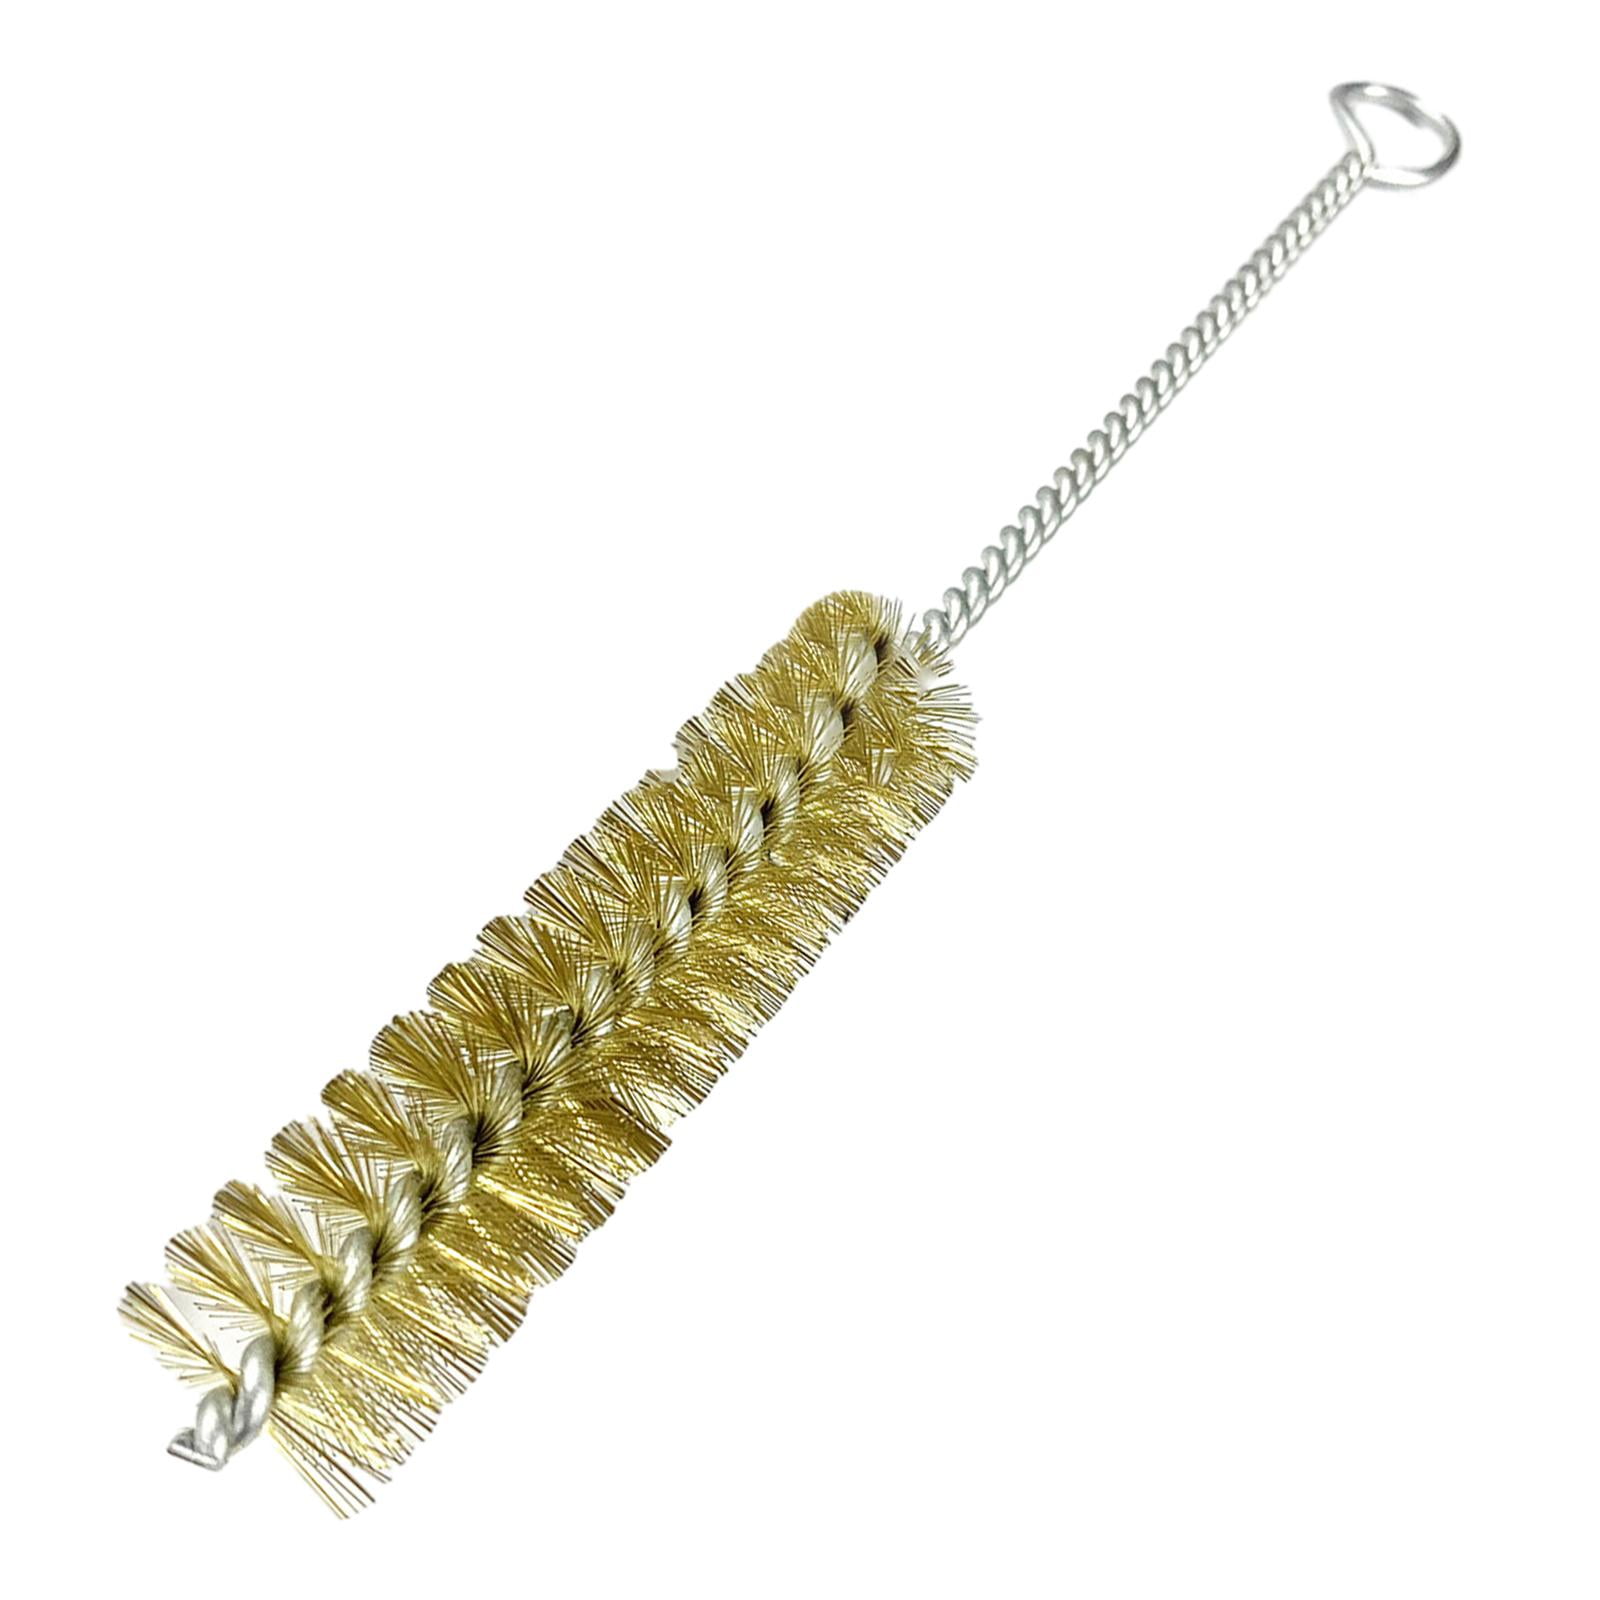 Wire Brush Pipe Cleaning Brush for Narrow Neck Skinny Space, Rust Cleaner  Brass Brush Durable Tube Brush for Polishing Tube Automotive Cleaning  Diameter 10mm 